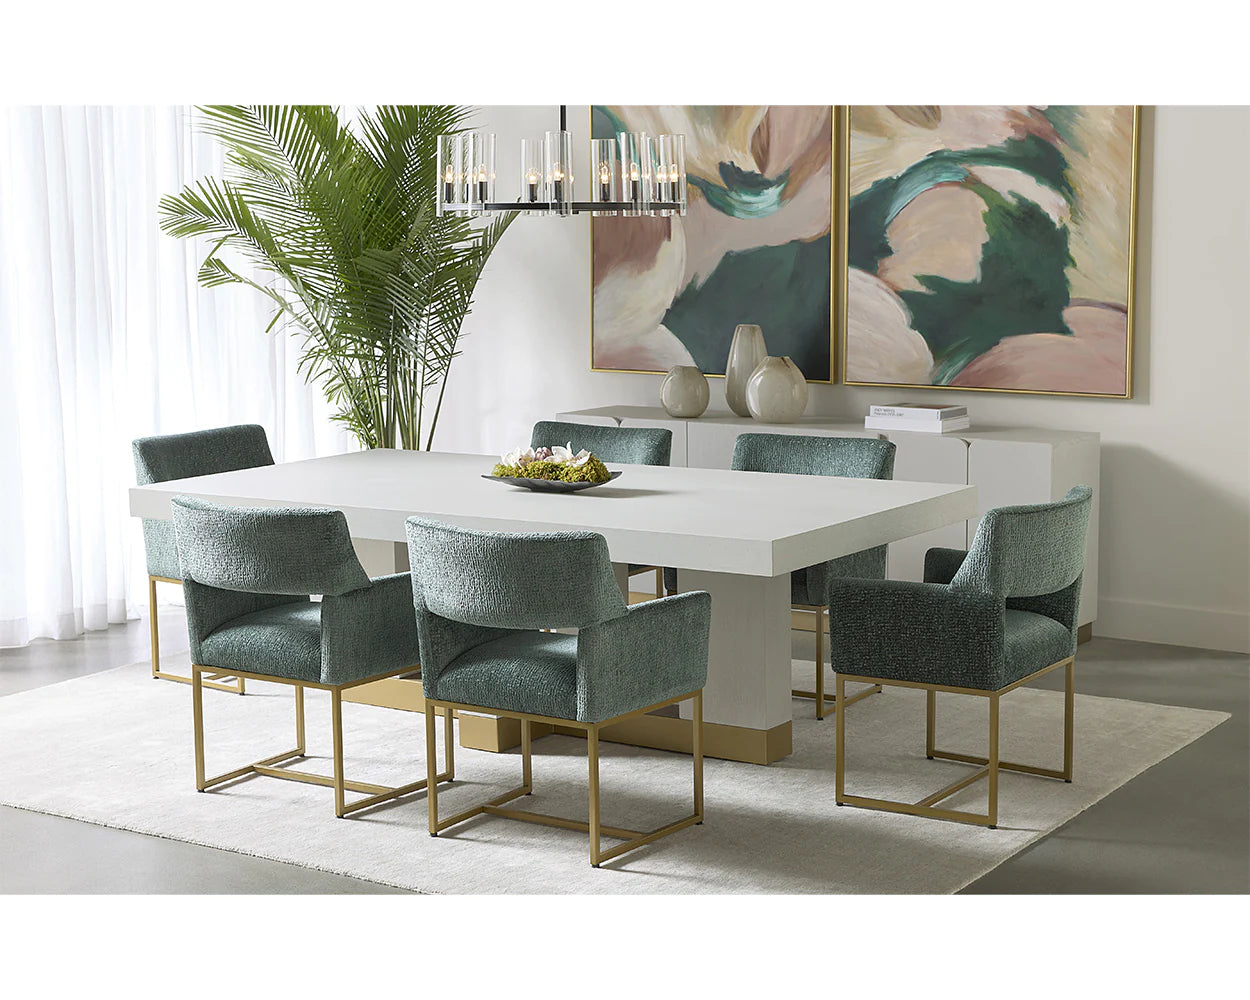 Aiyana Dining Table with matching Aiyana Dining Armchairs in Agave.